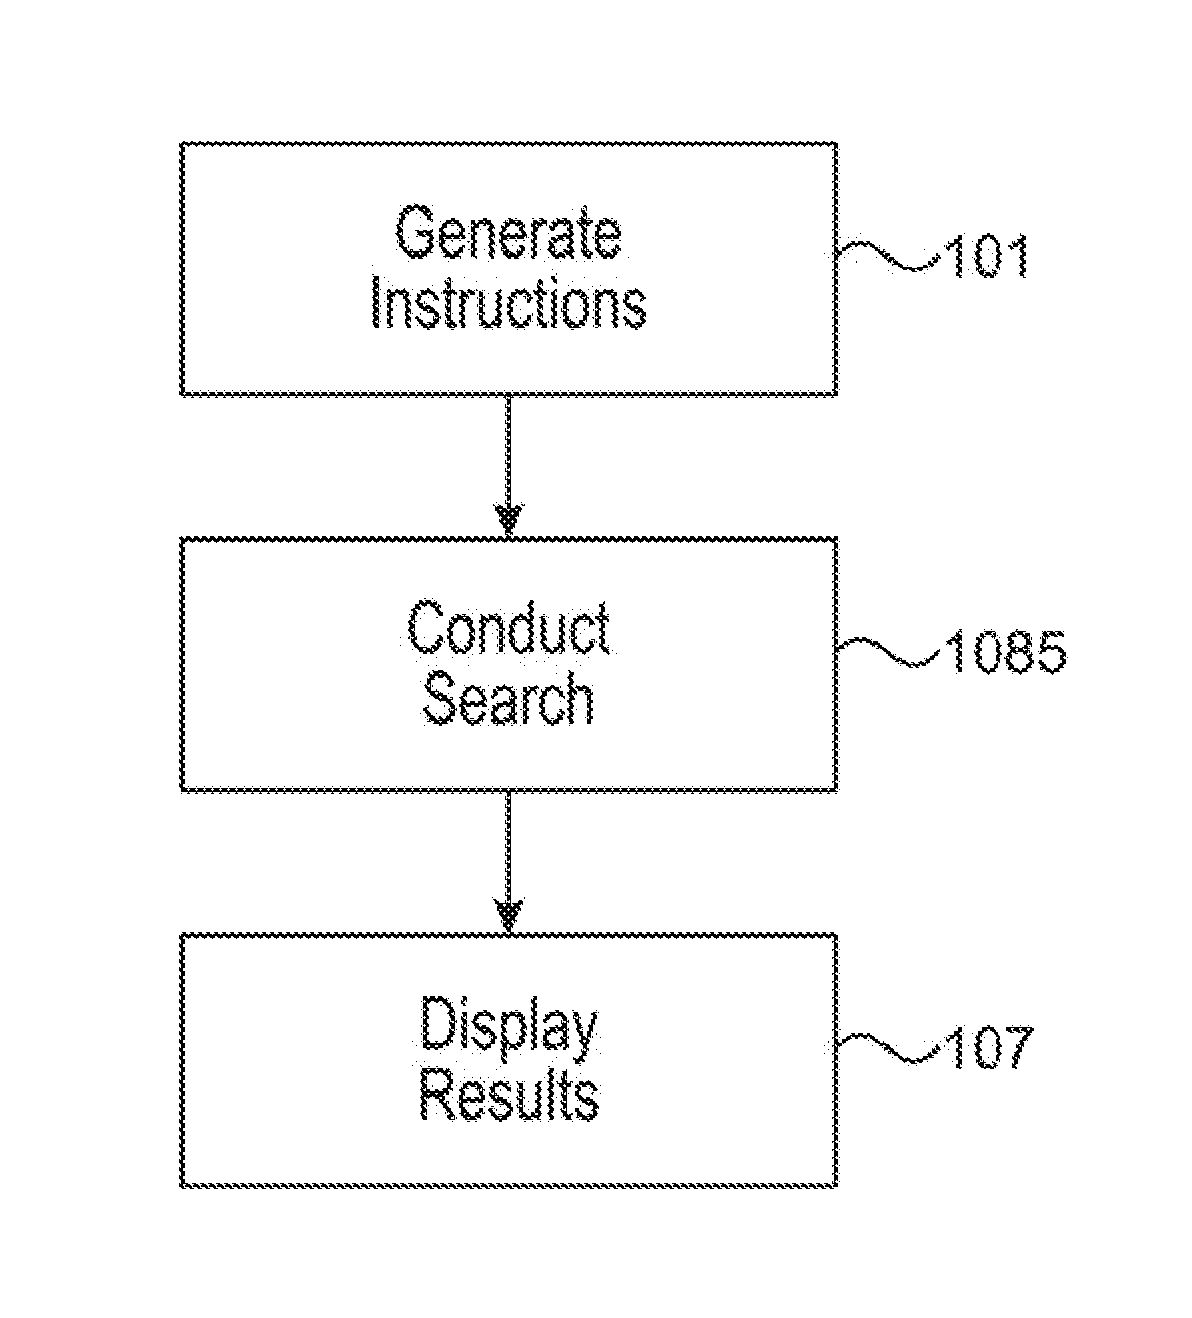 Systems and methods for multi-dimensional computer-aided searching